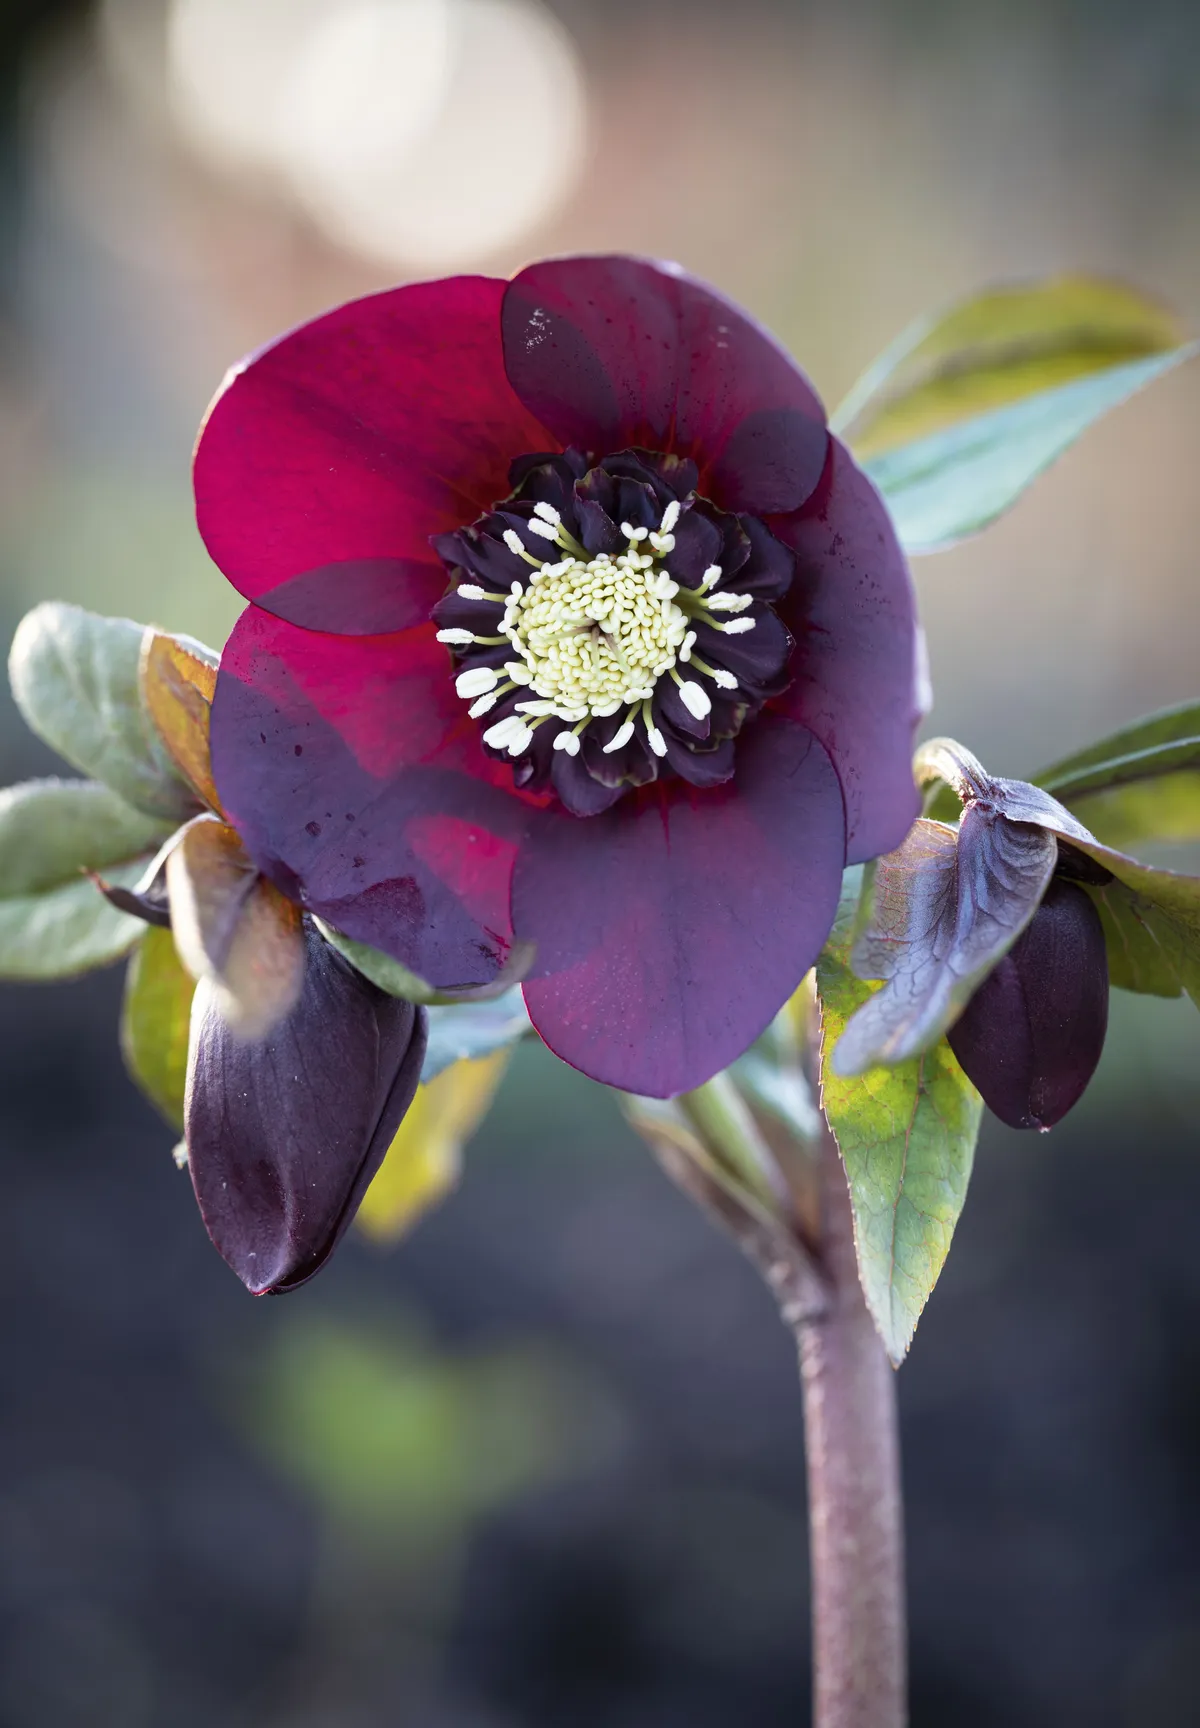 Helleborus x hybridus ‘Red Lady’ Semi-evergreen, leathery palmate leaves throughout the year with nodding, cupped burgundy flowers from late winter into early spring. 40cm x 40cm. RHS H7, USDA 4a-9b.